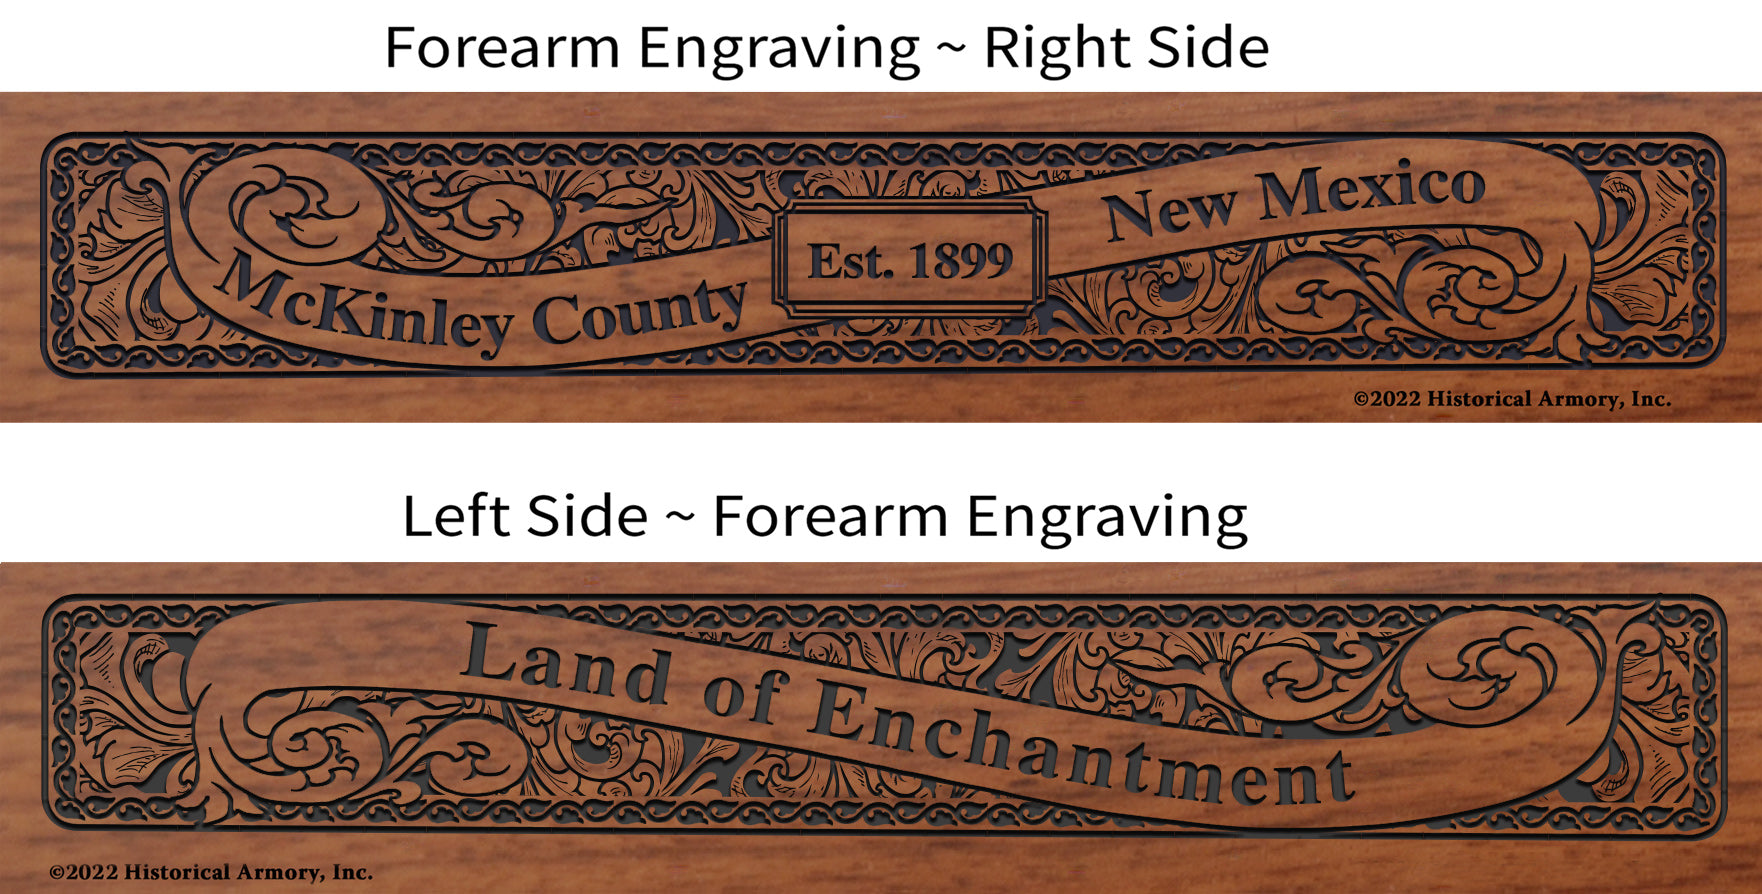 McKinley County New Mexico Engraved Rifle Forearm